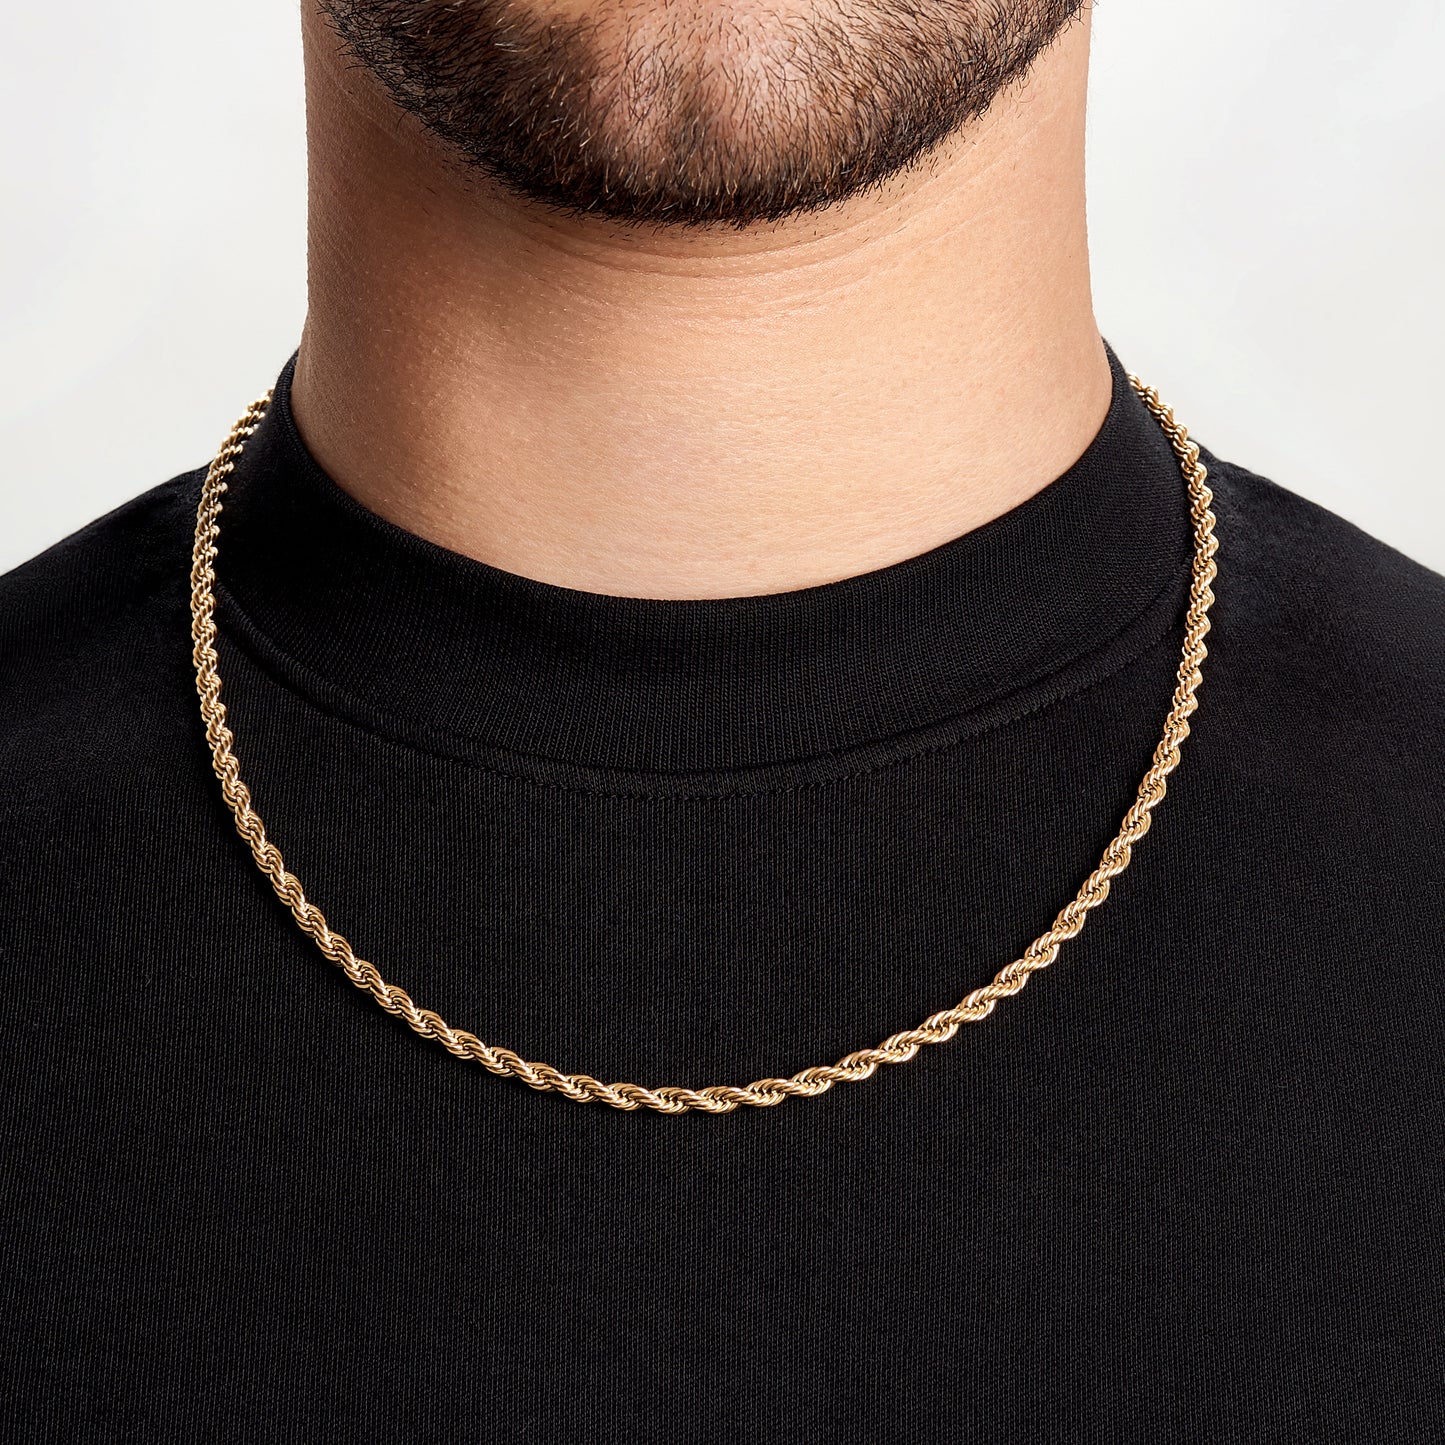 Gold Rope Chain Jewellery Necklace Men